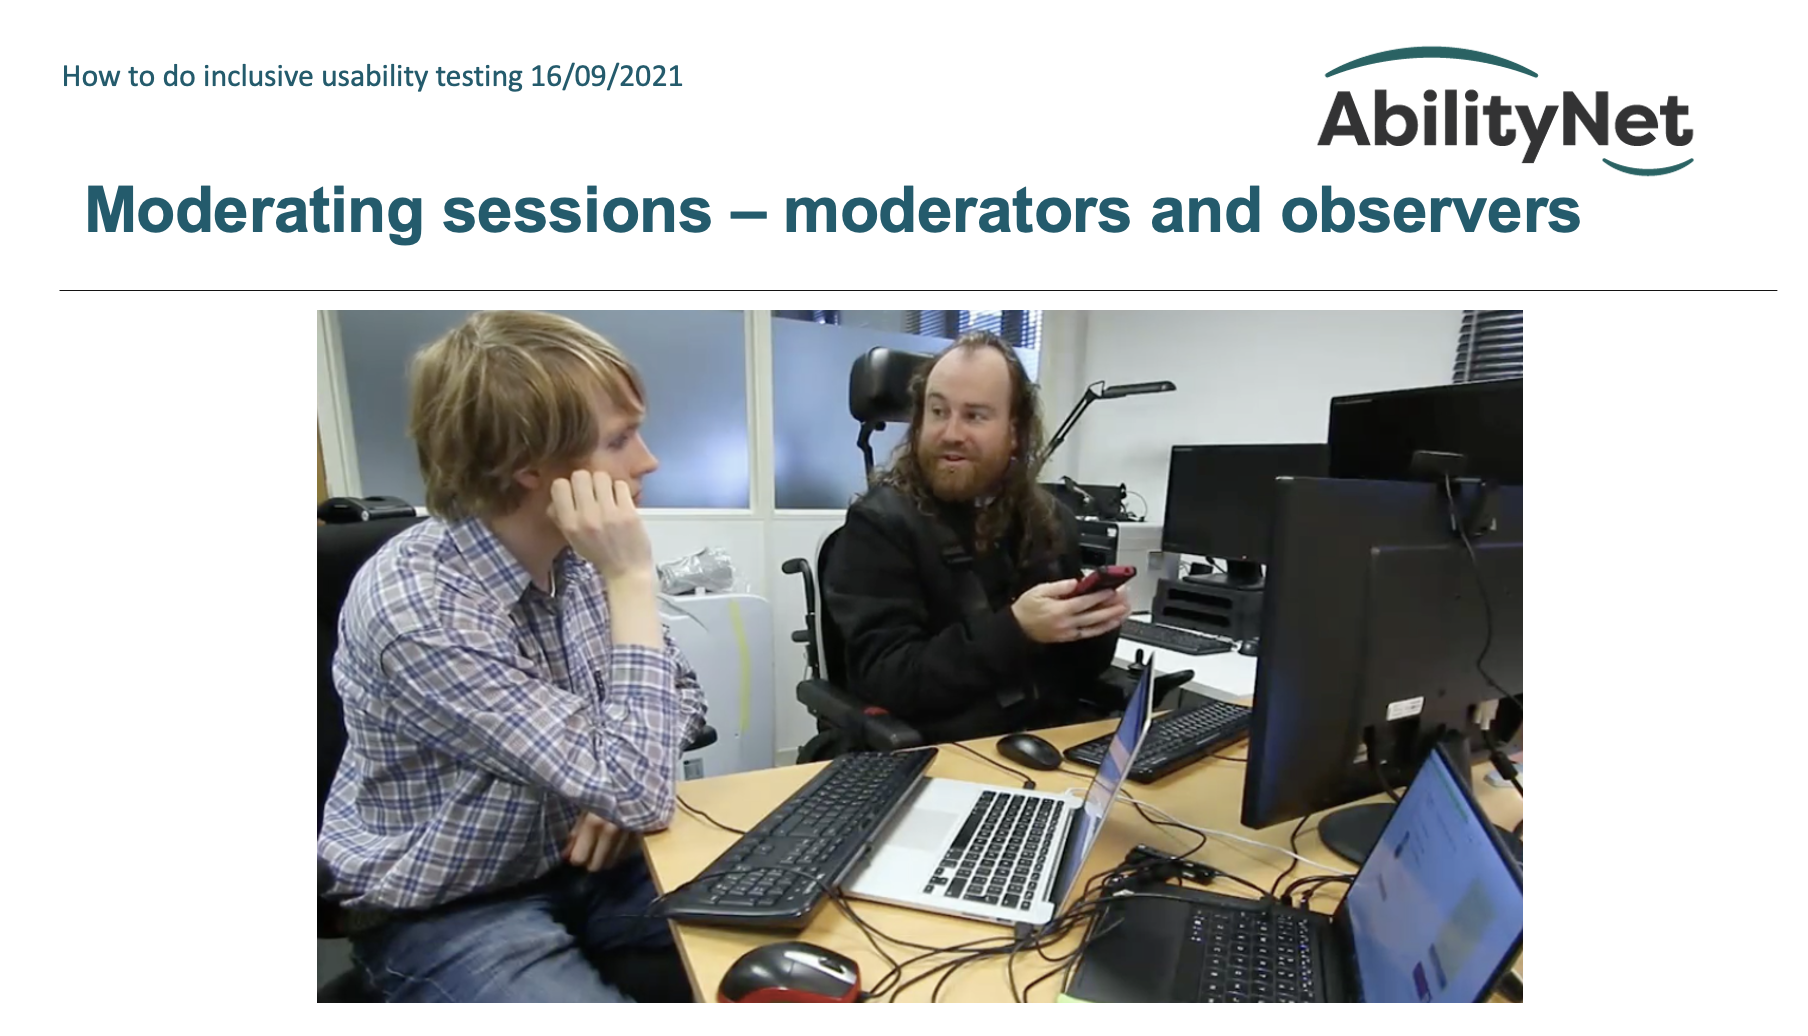 Screenshot of PPT presentation showing two men at a computer table and the words Moderating sessions - Moderators and observers